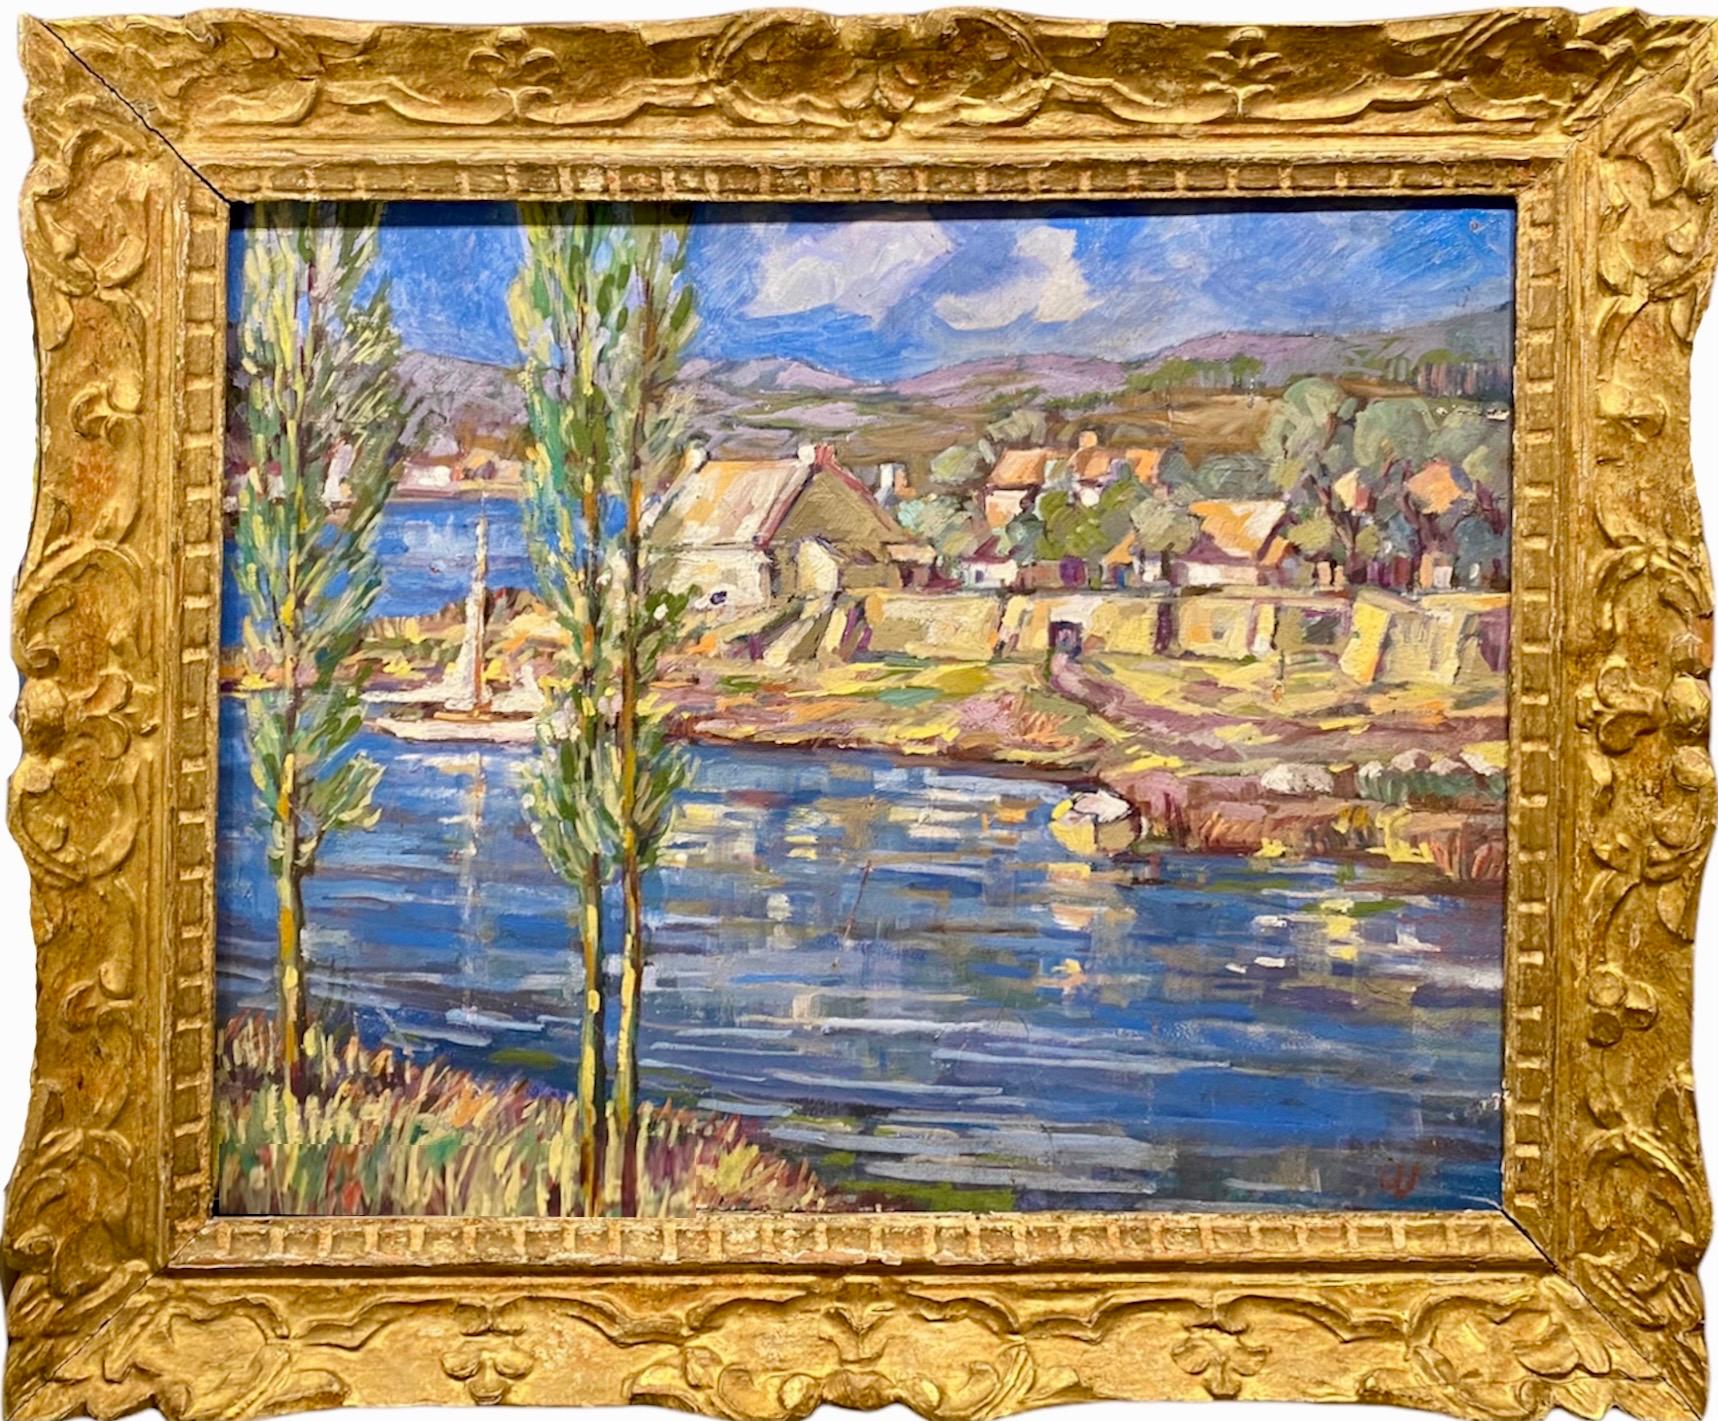 Unknown Abstract Painting - French Post Impressionist painting - Ecole de Paris - Provence landscape harbour